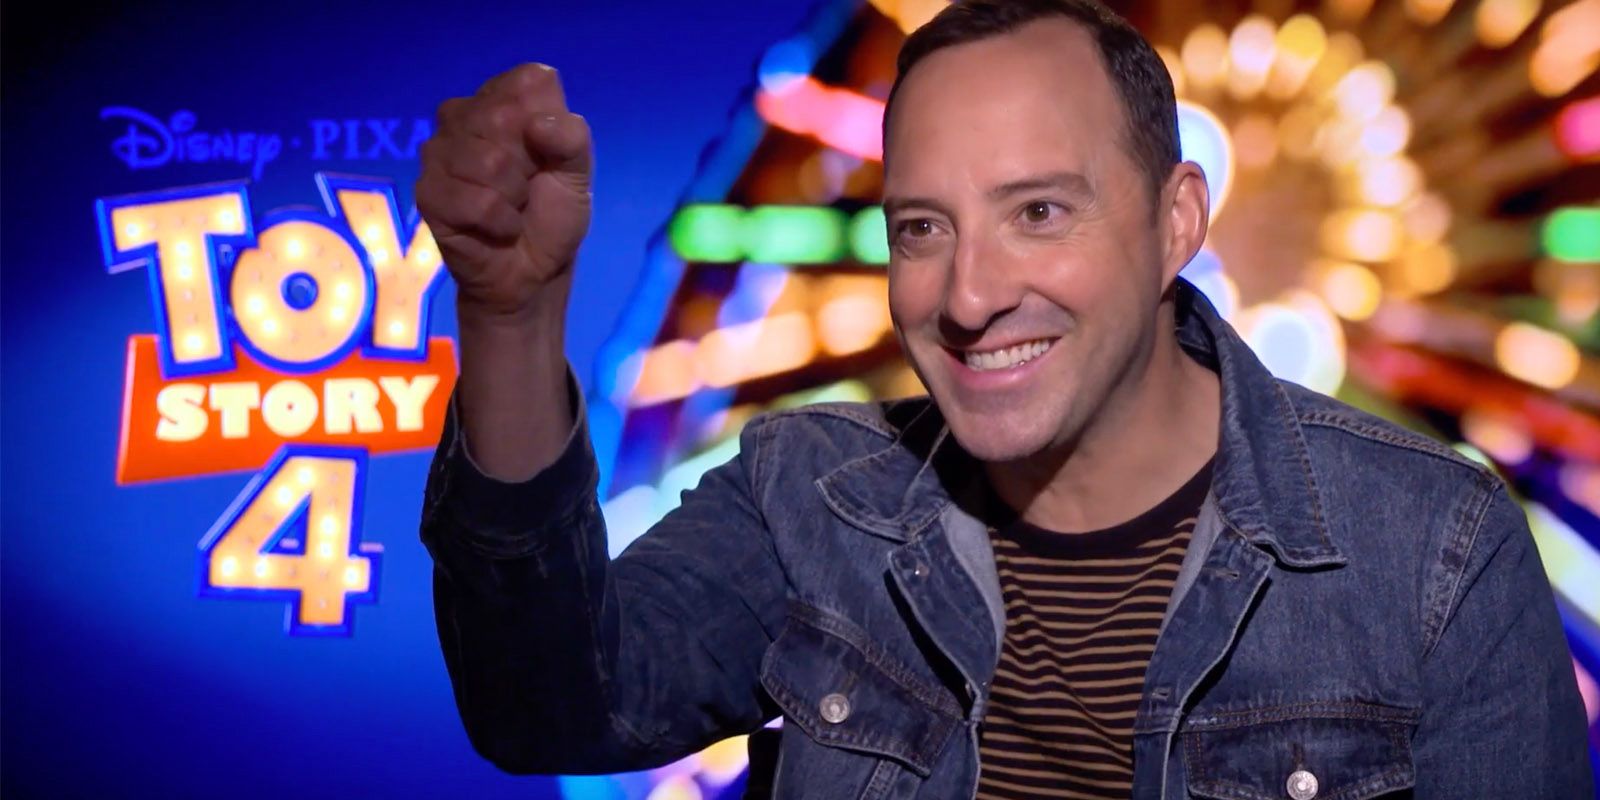 Tony Hale Interview Toy Story 4